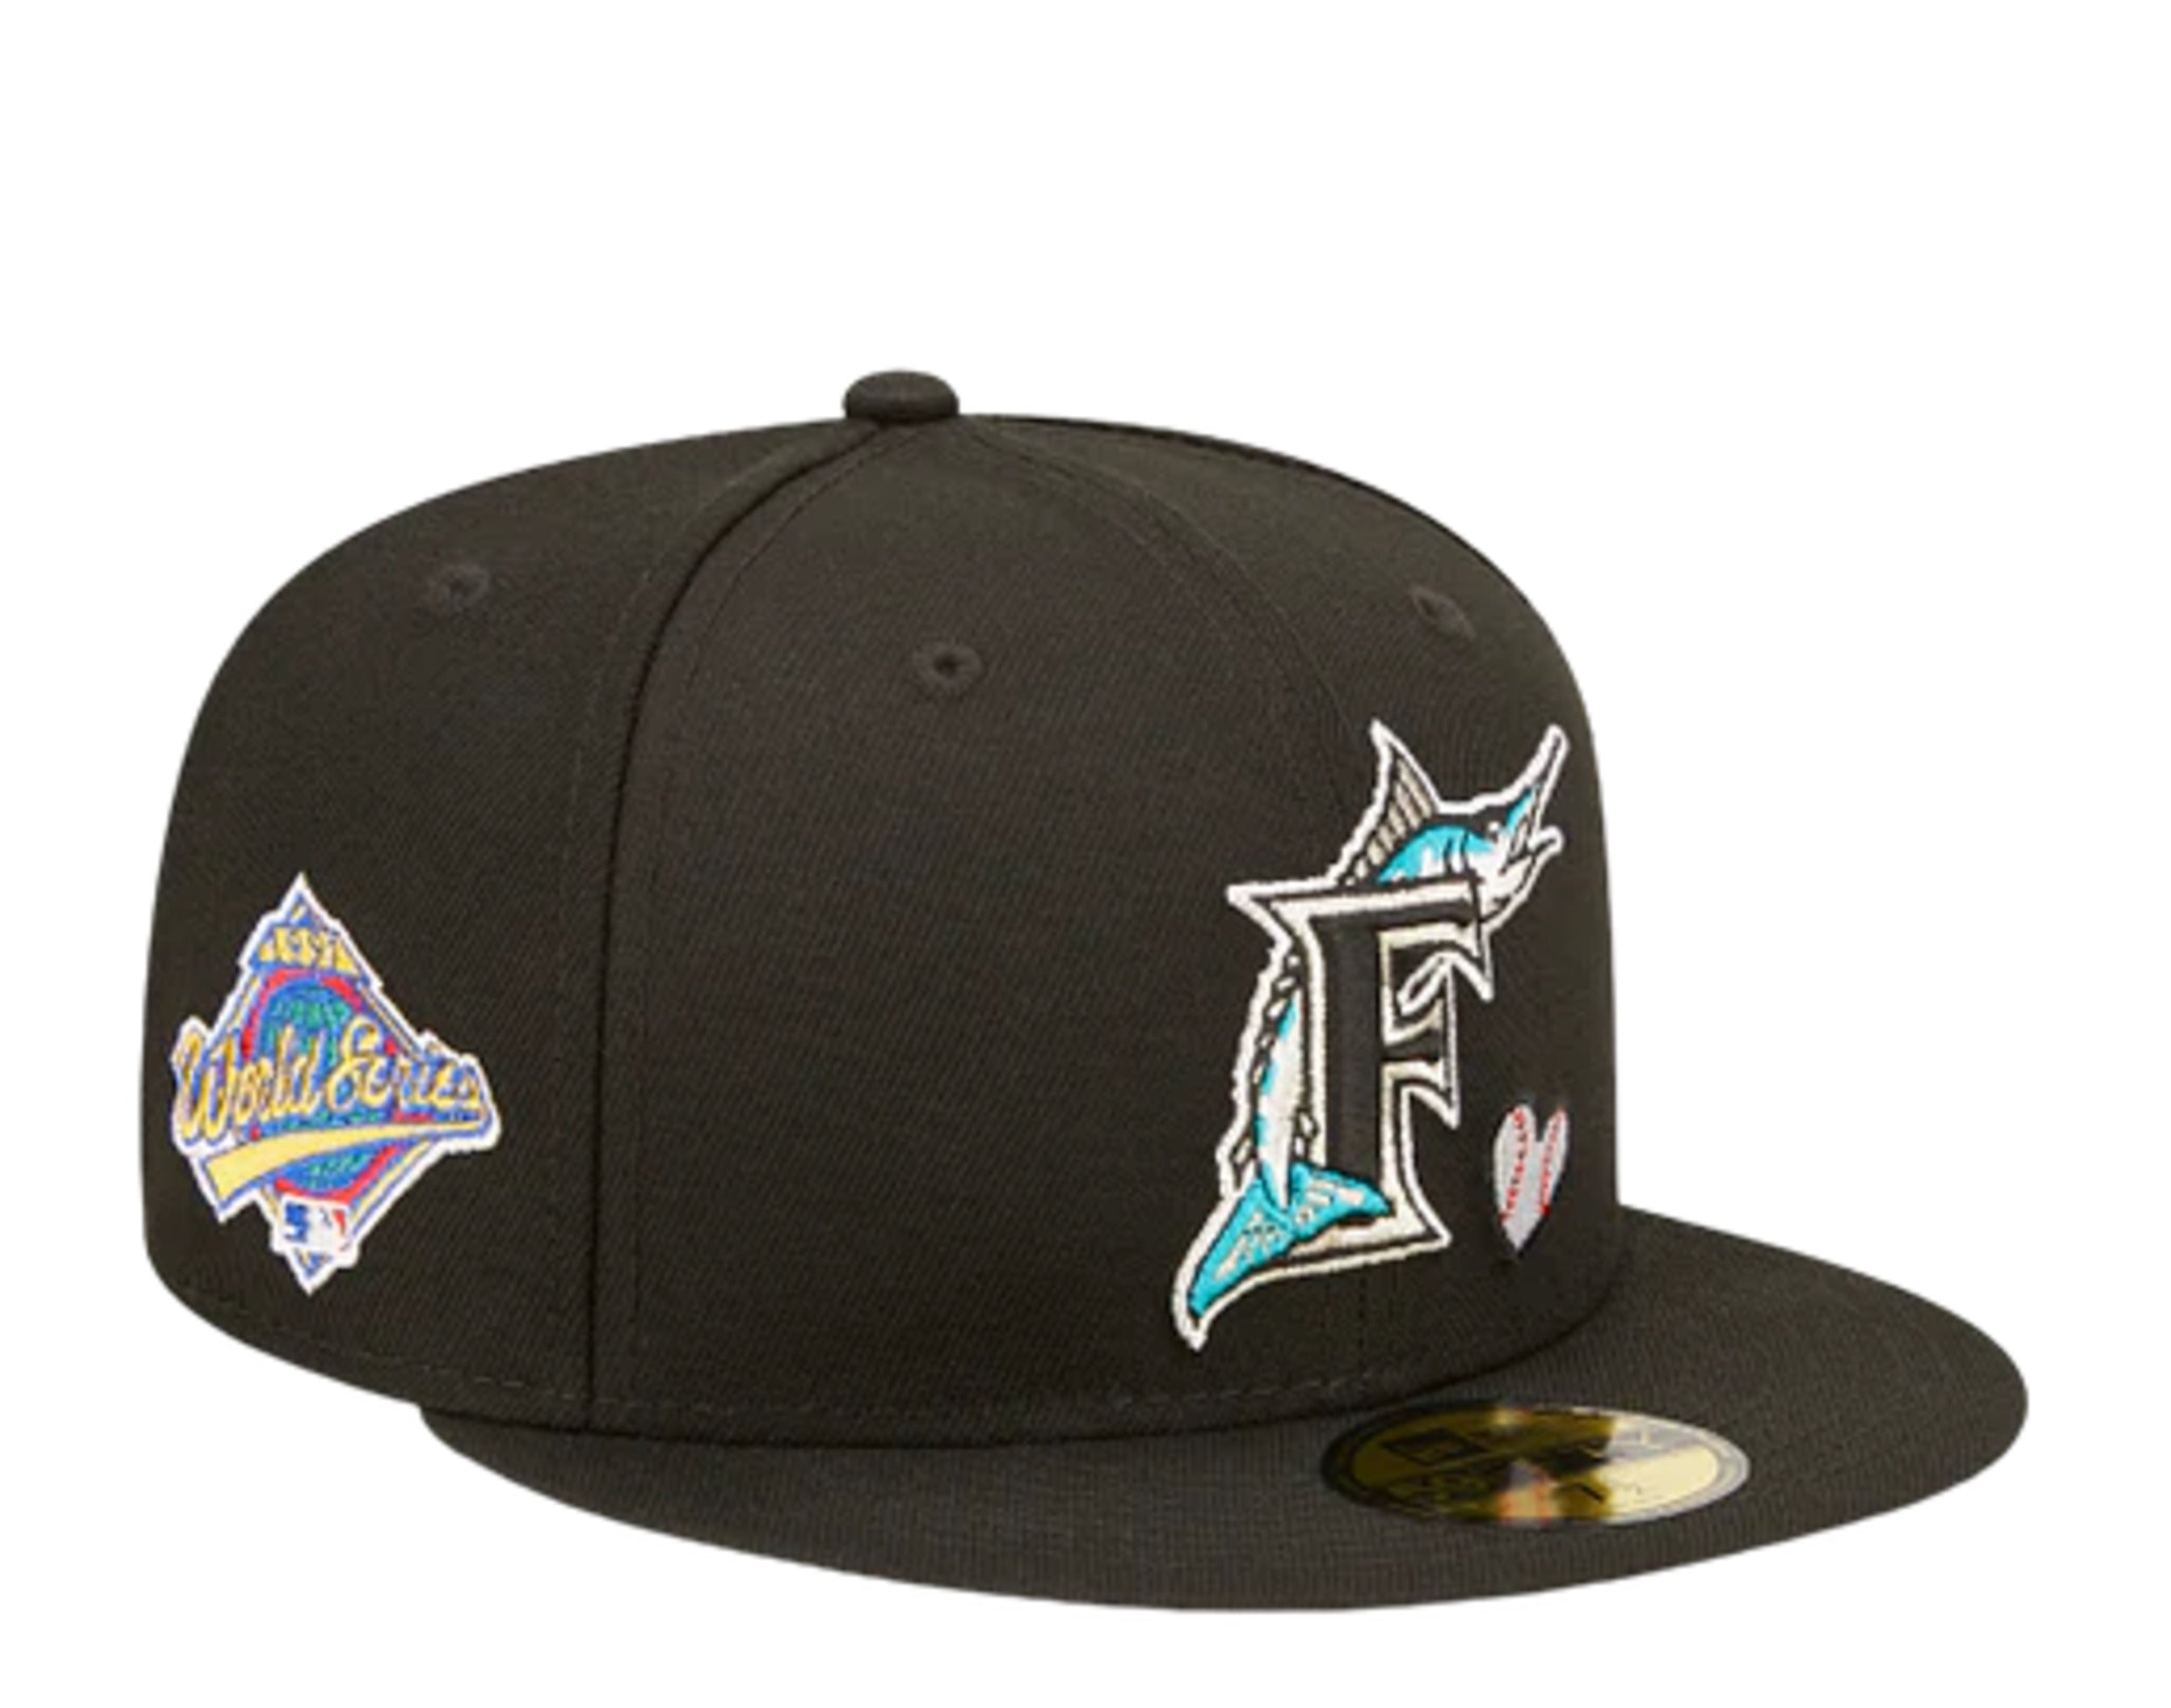 New Era 59Fifty MLB Florida Marlins Team Heart Fitted Hat